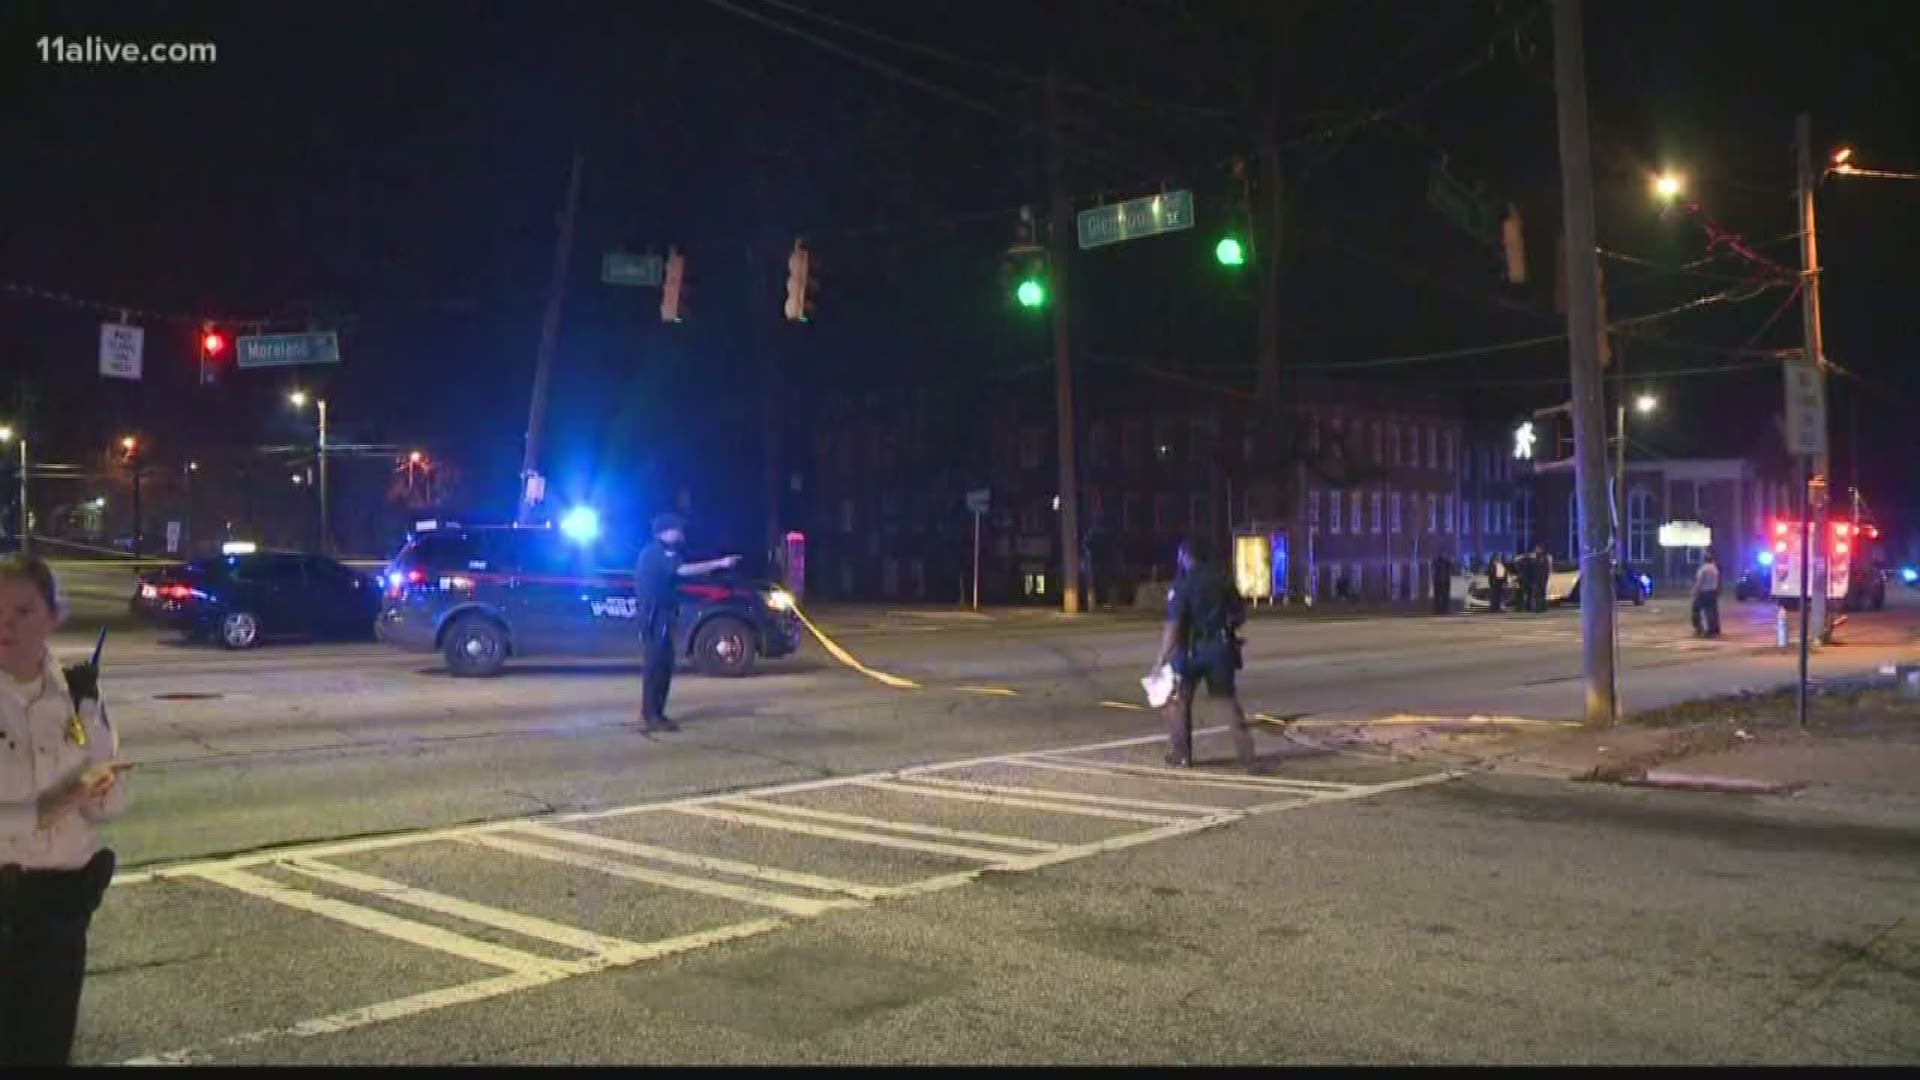 Police said a man was shot in the face during a drive-by incident in the East Atlanta Village neighborhood, causing a chain reaction wreck early Saturday.